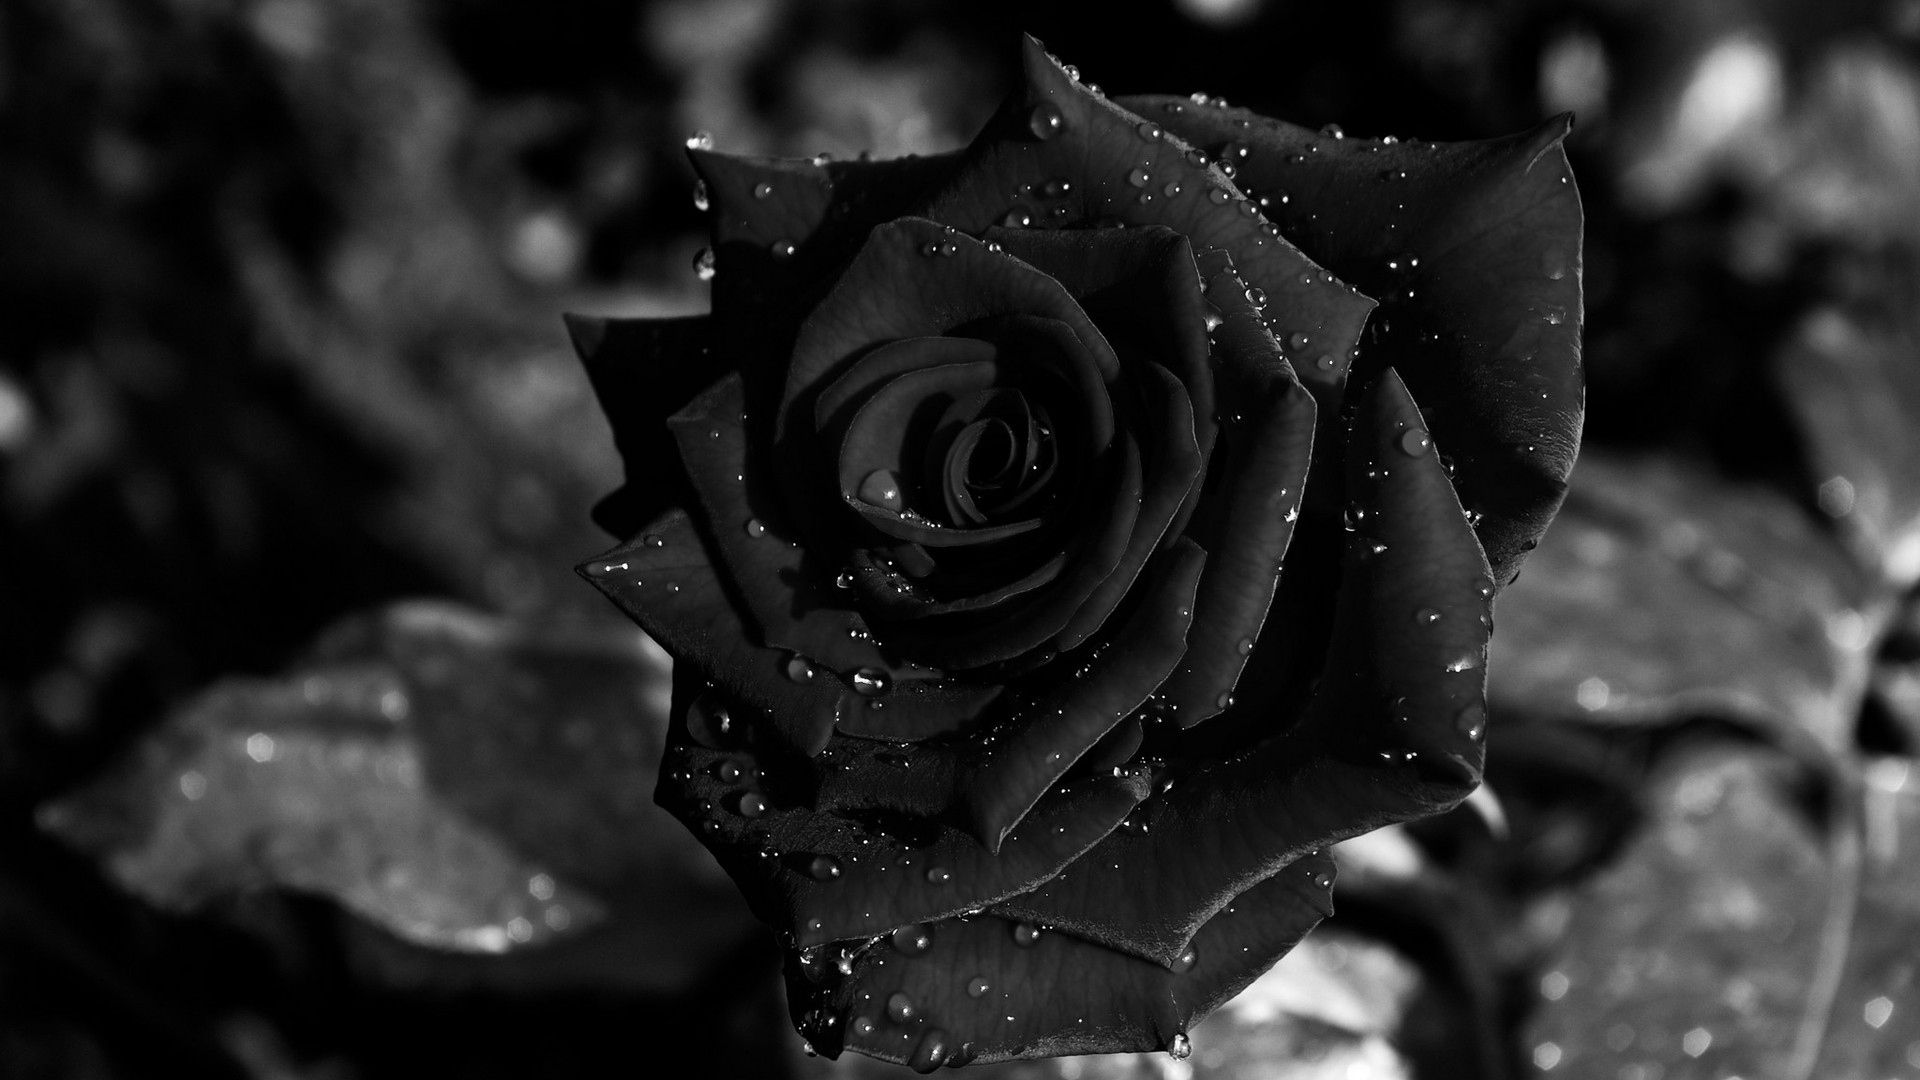 Black Rose HD Wallpapers HD Wallpapers COLOR BLACK Pinterest HD Wallpapers Pinterest Black roses, Hd wallpaper and Wallpaper